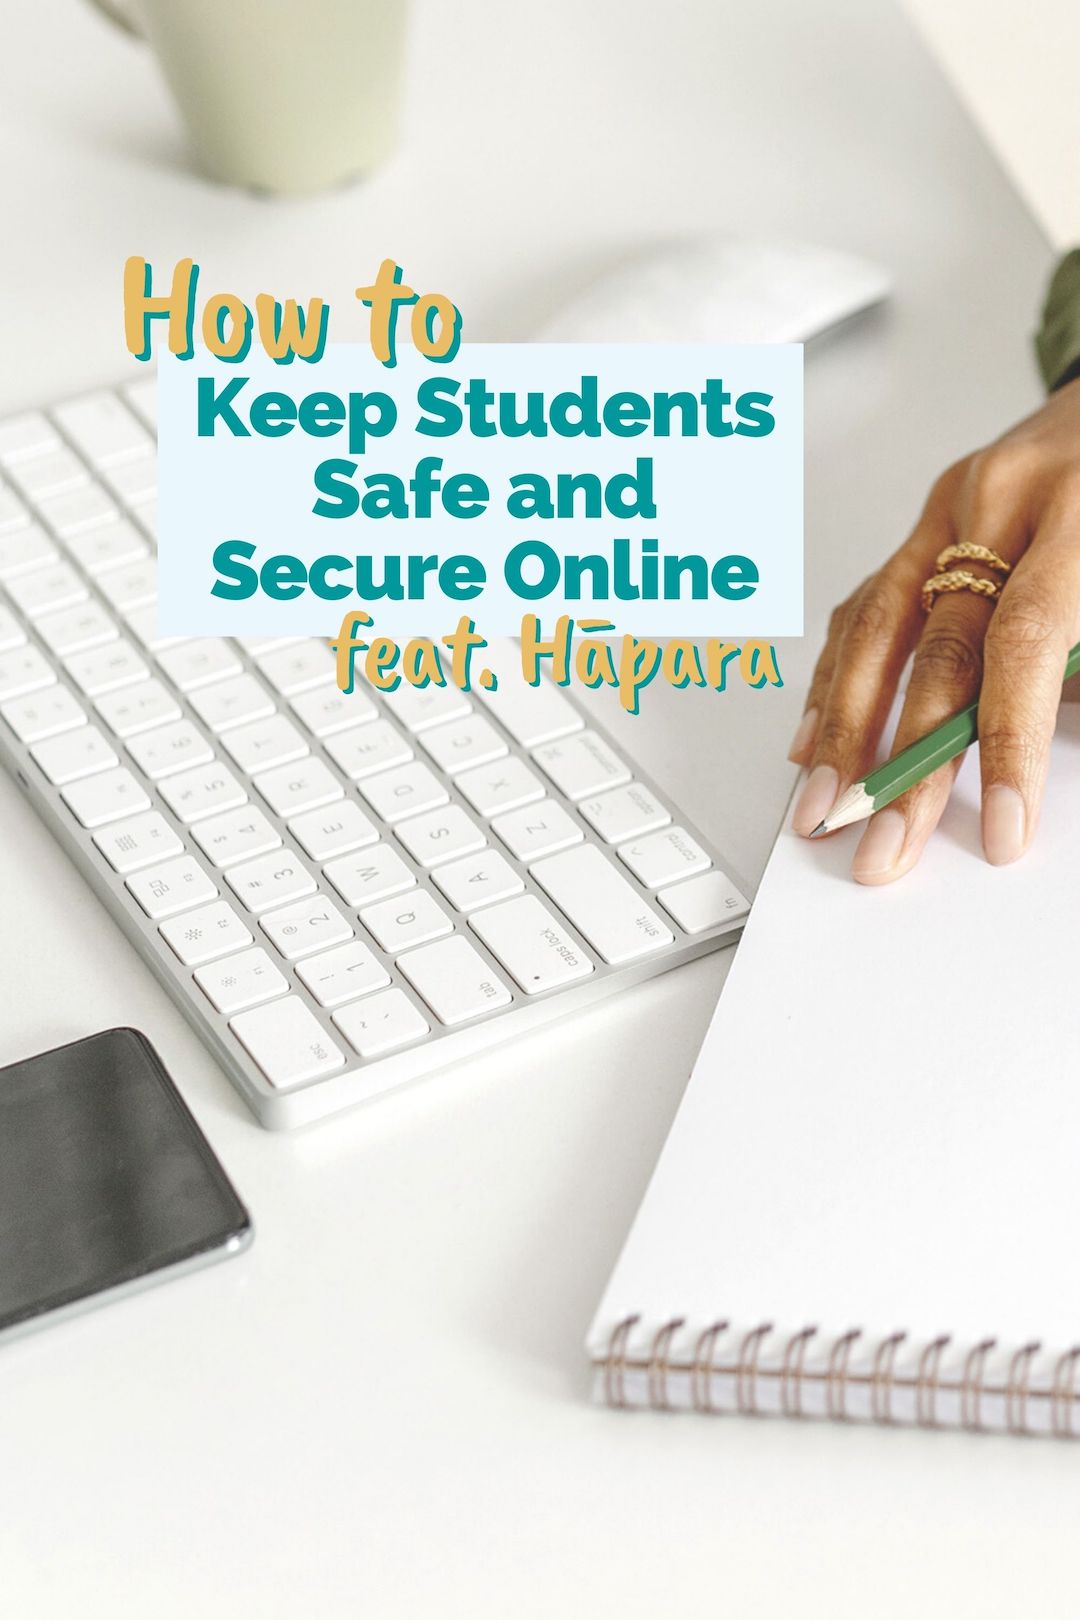 What steps do you take to keep students safe? The idea of online safety is a big one, and you can make a commitment to keep students safe online.